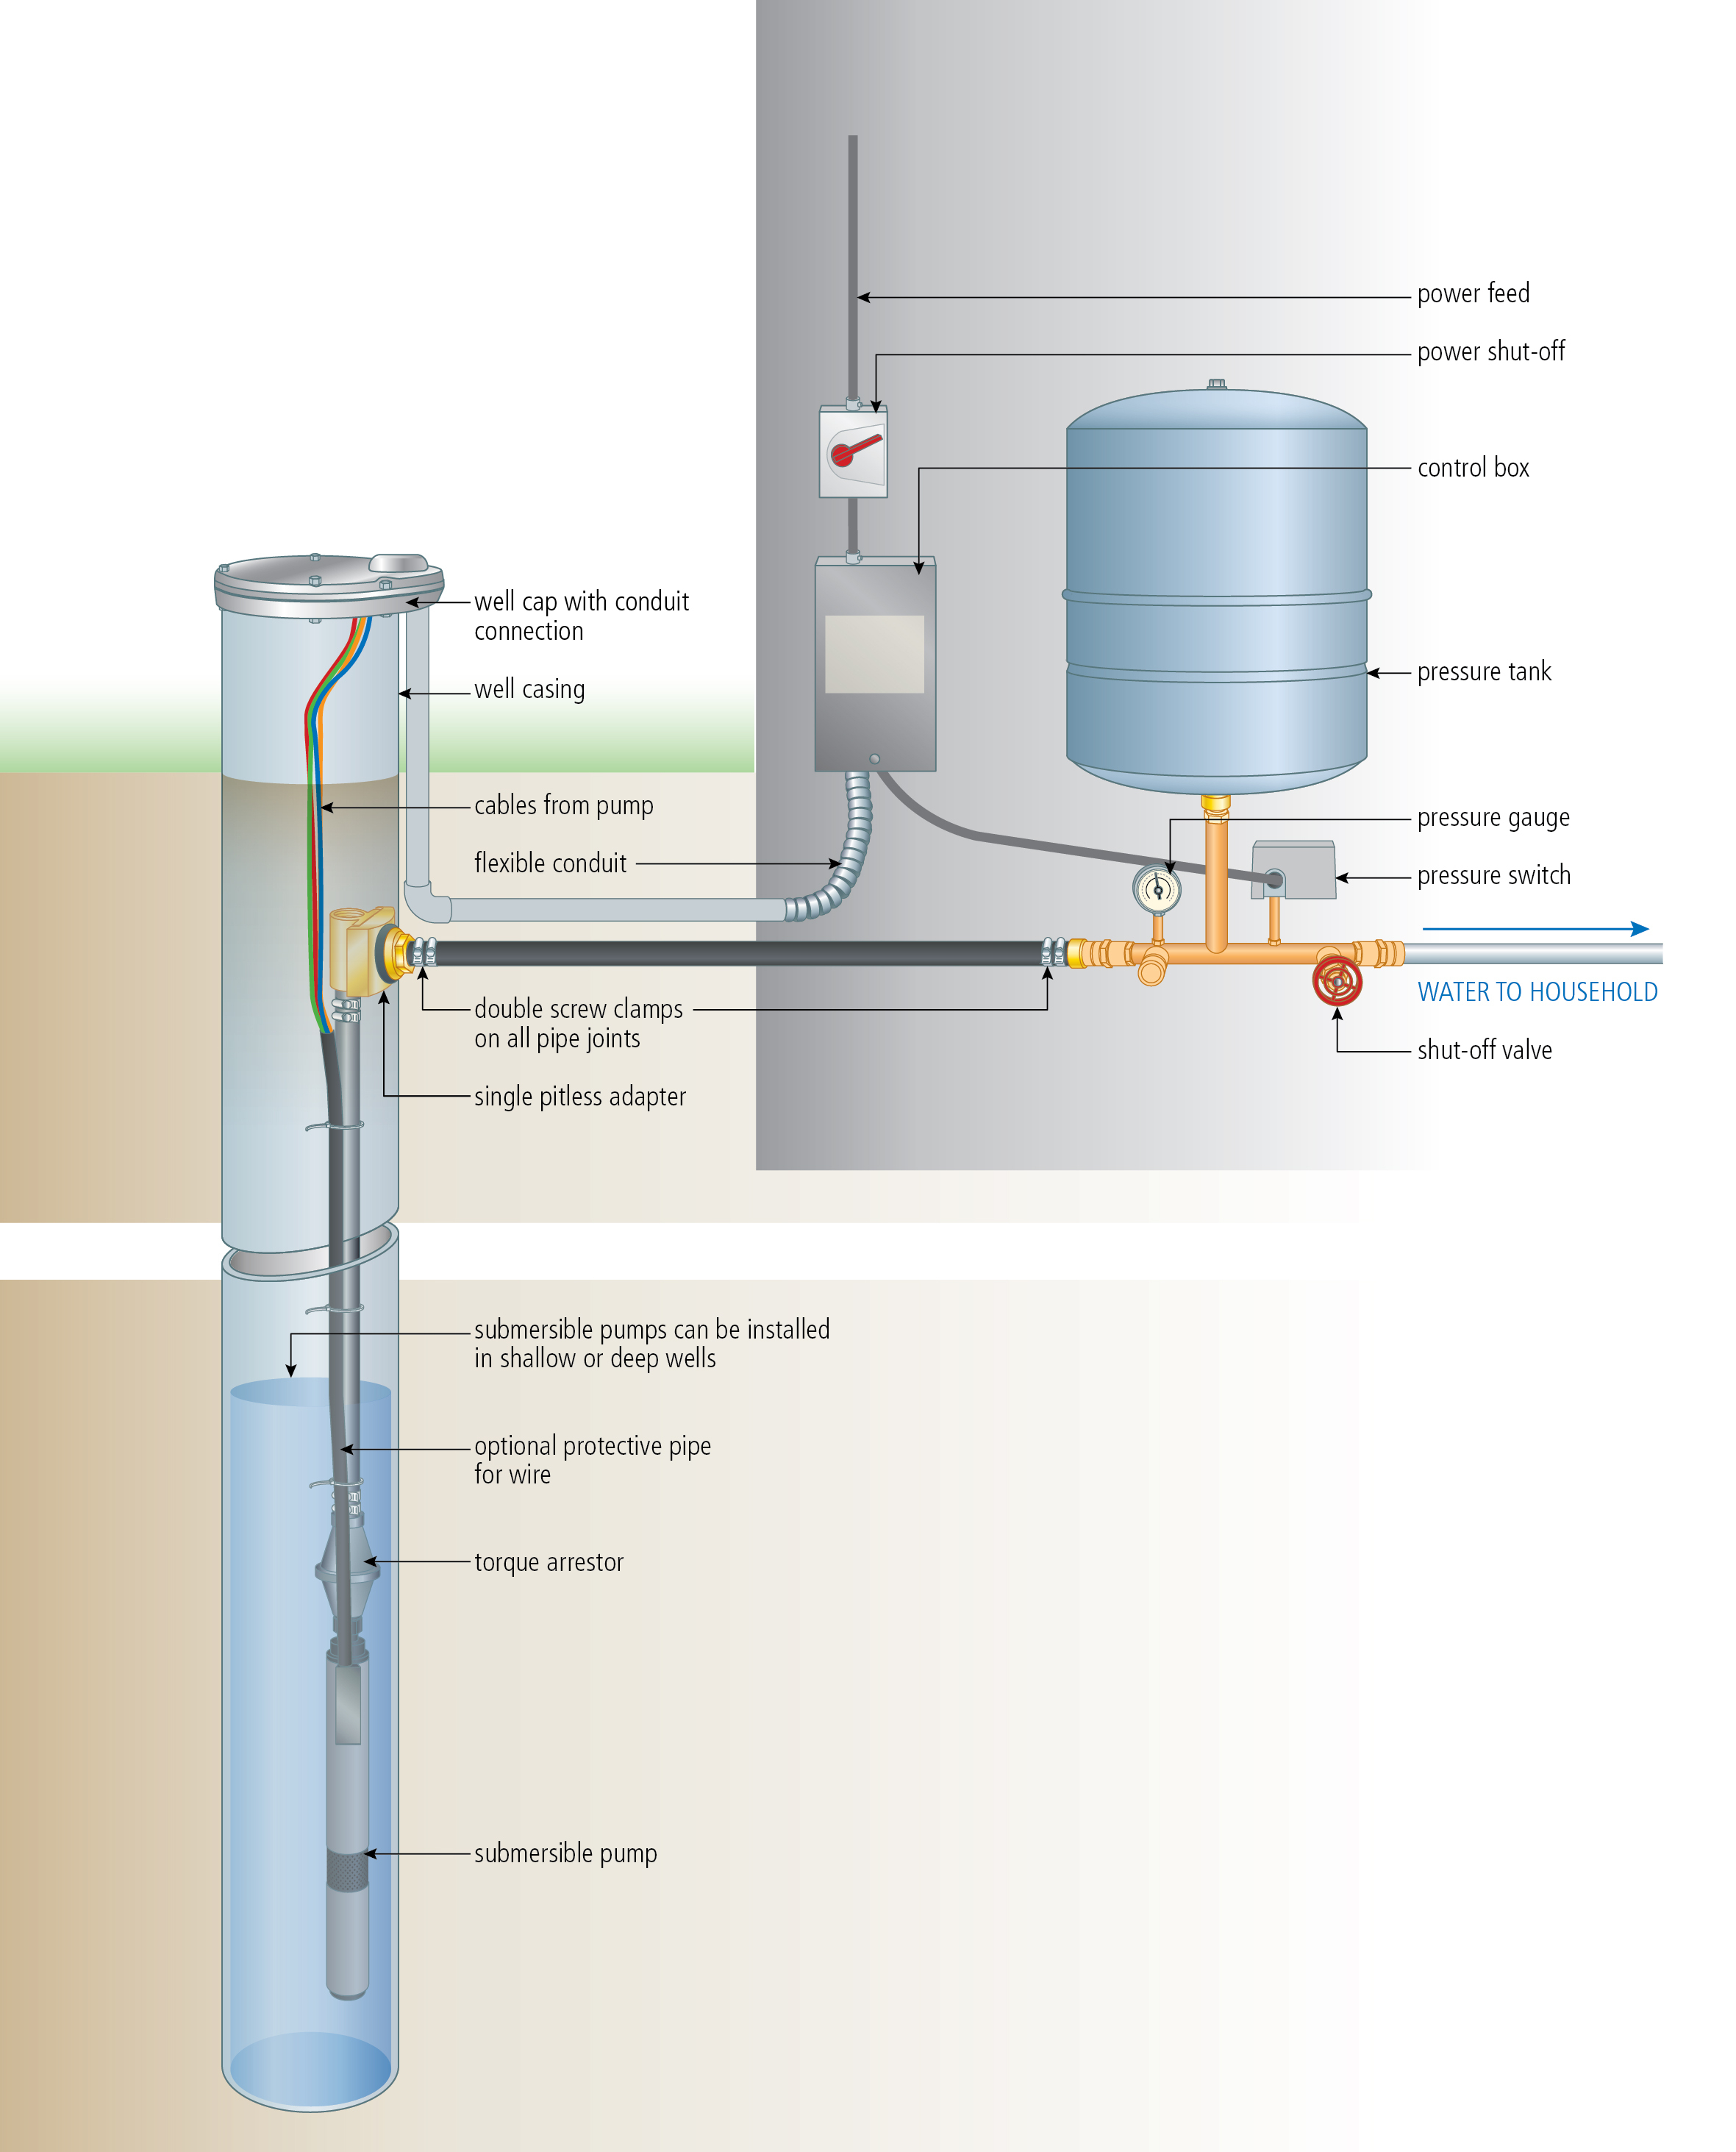 Install A Submersible Pump: 6 Lessons For Doing It Right - Well Pump Wiring Diagram